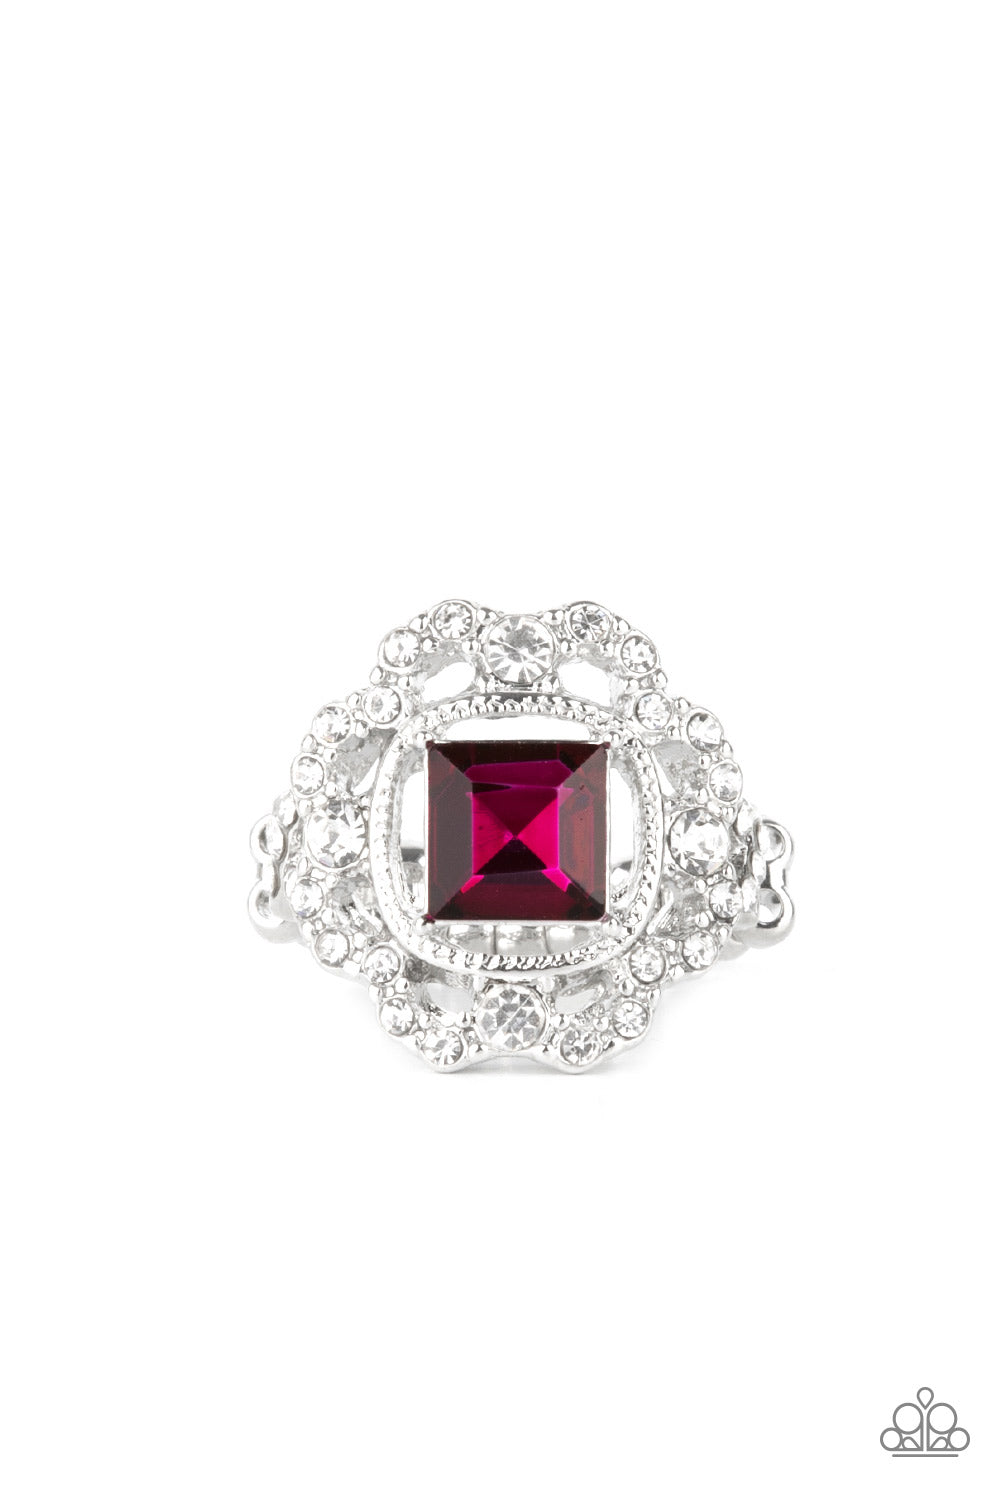 Candid Charisma Pink Ring - Paparazzi Accessories  An airy flower-petal frame encrusted with brilliant white rhinestones highlights a stunning square-cut pink gem. Set in silver pronged fittings the timeless gem sits center stage creating a charismatic display atop the finger. Features a dainty stretchy band for a flexible fit.  All Paparazzi Accessories are lead free and nickel free!  Sold as one individual ring.